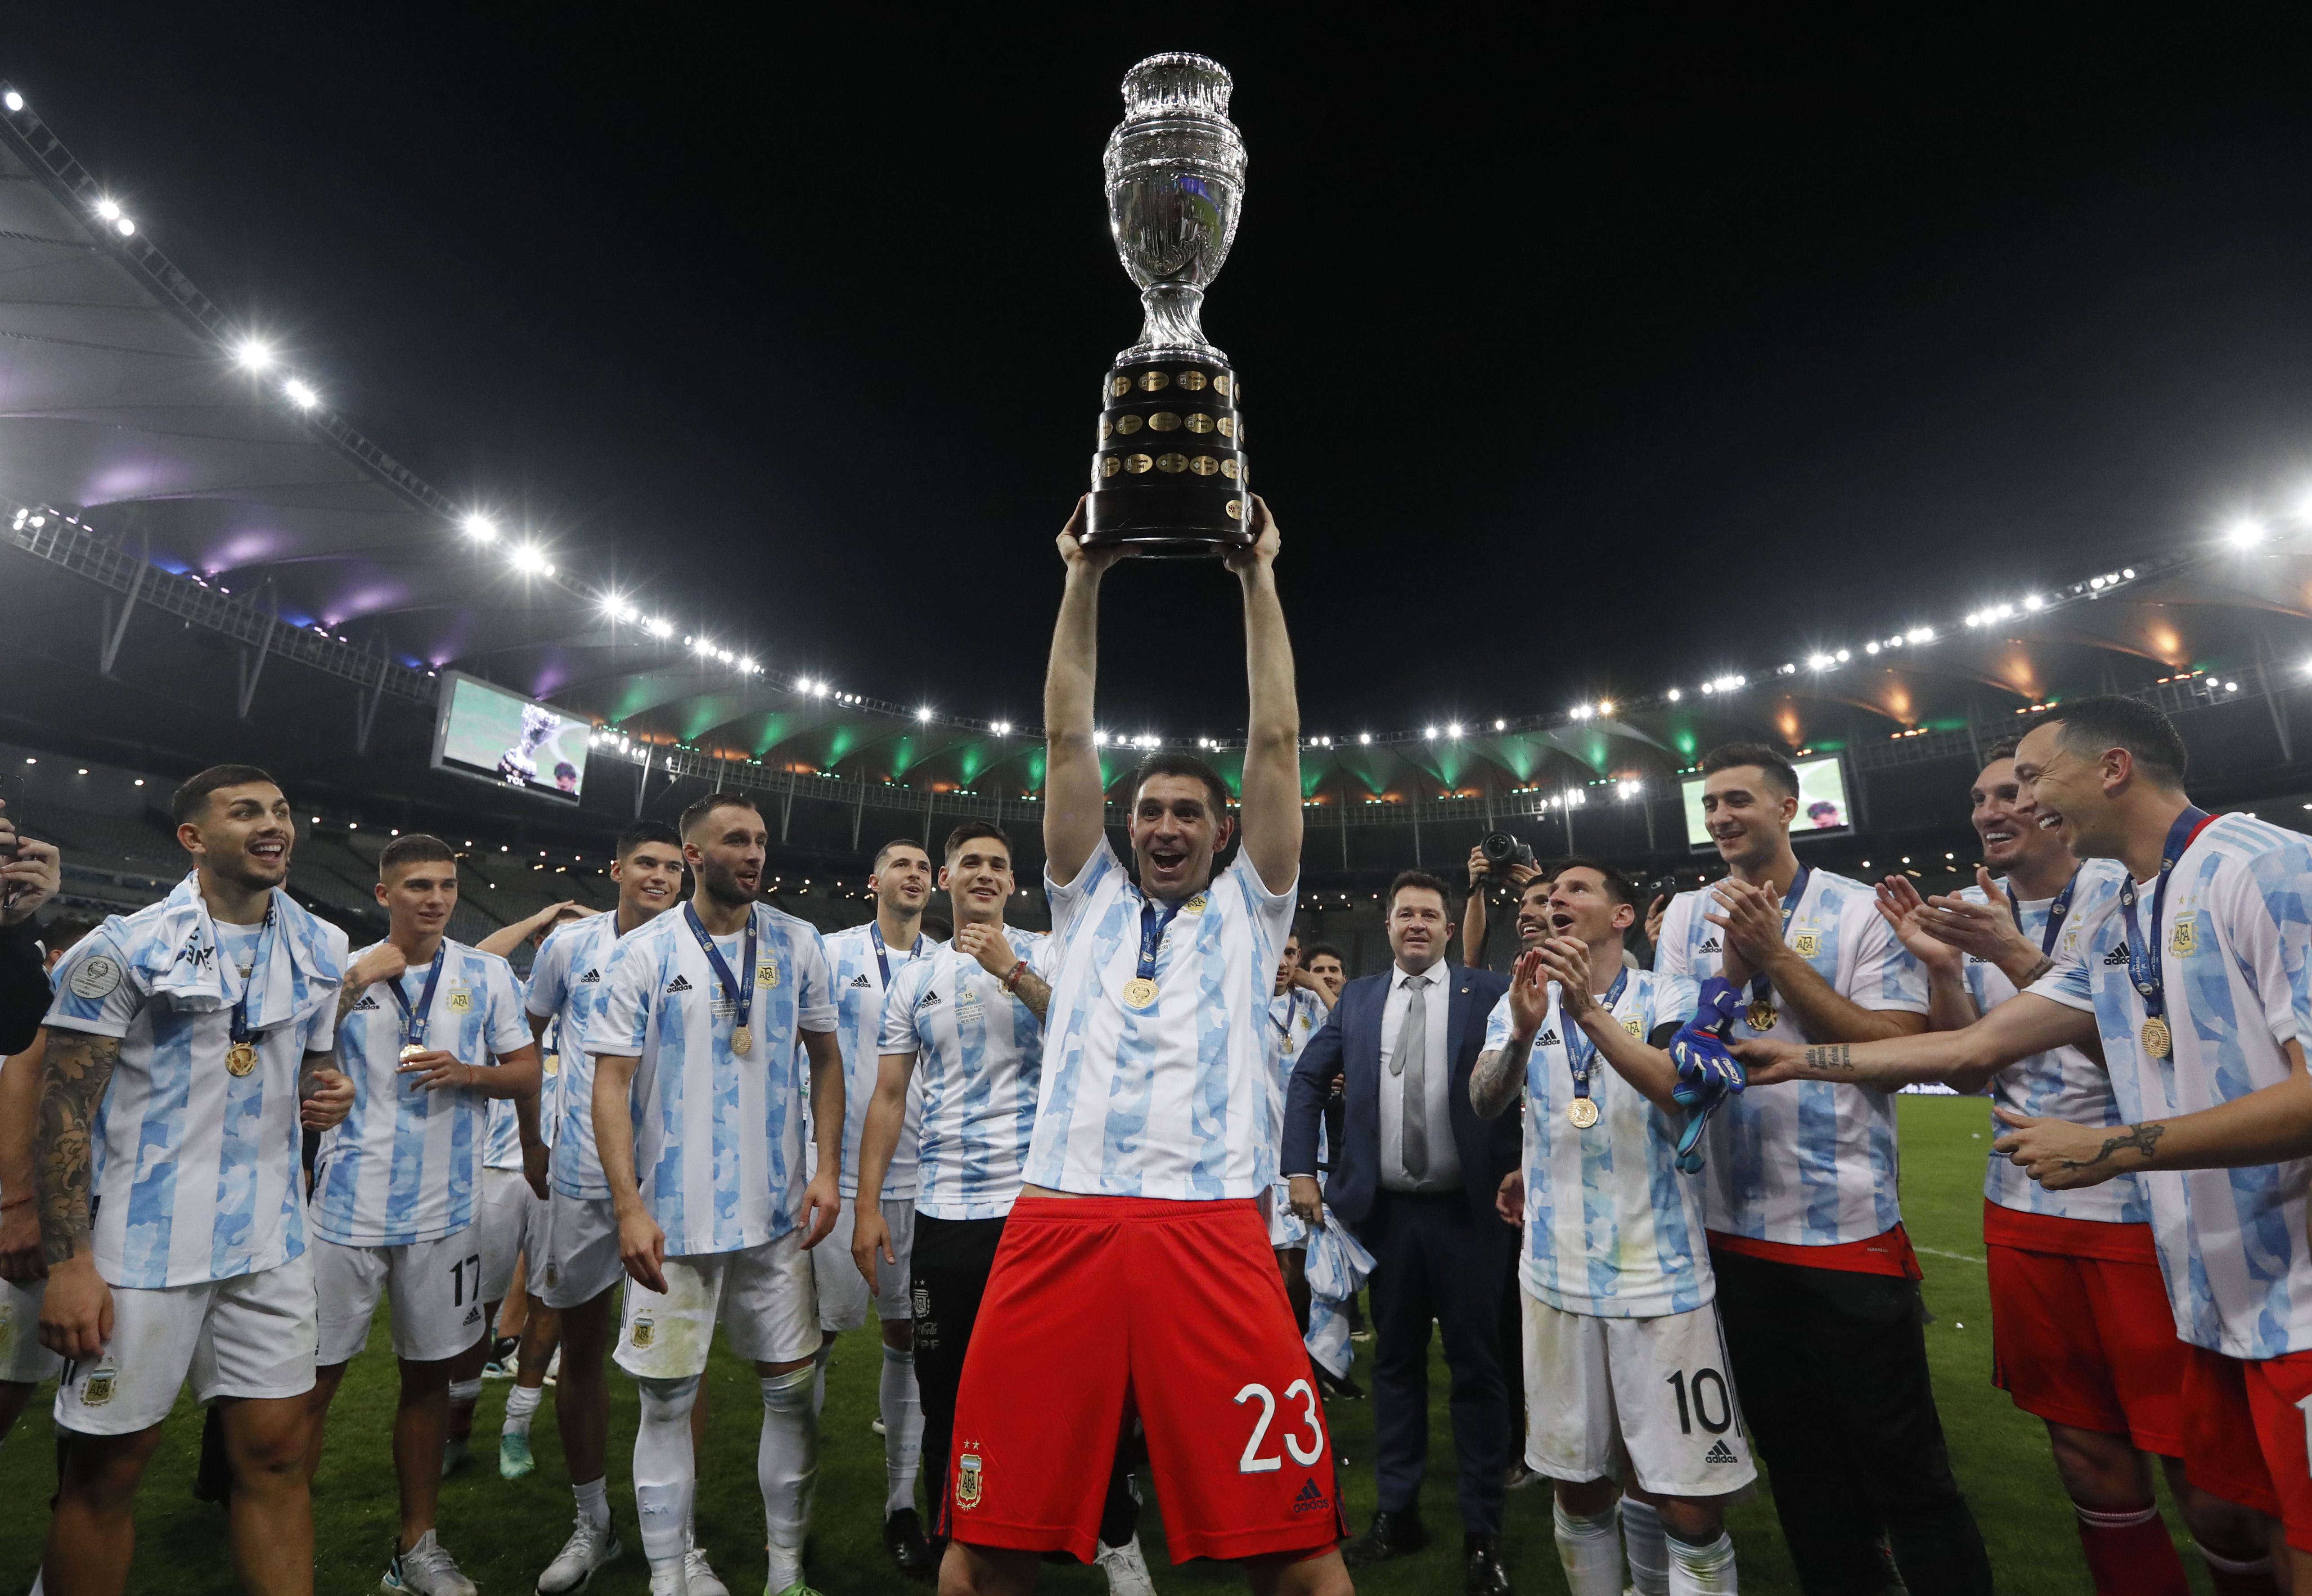 Two years ago: Emiliano Martínez turns into Argentina hero at Copa America